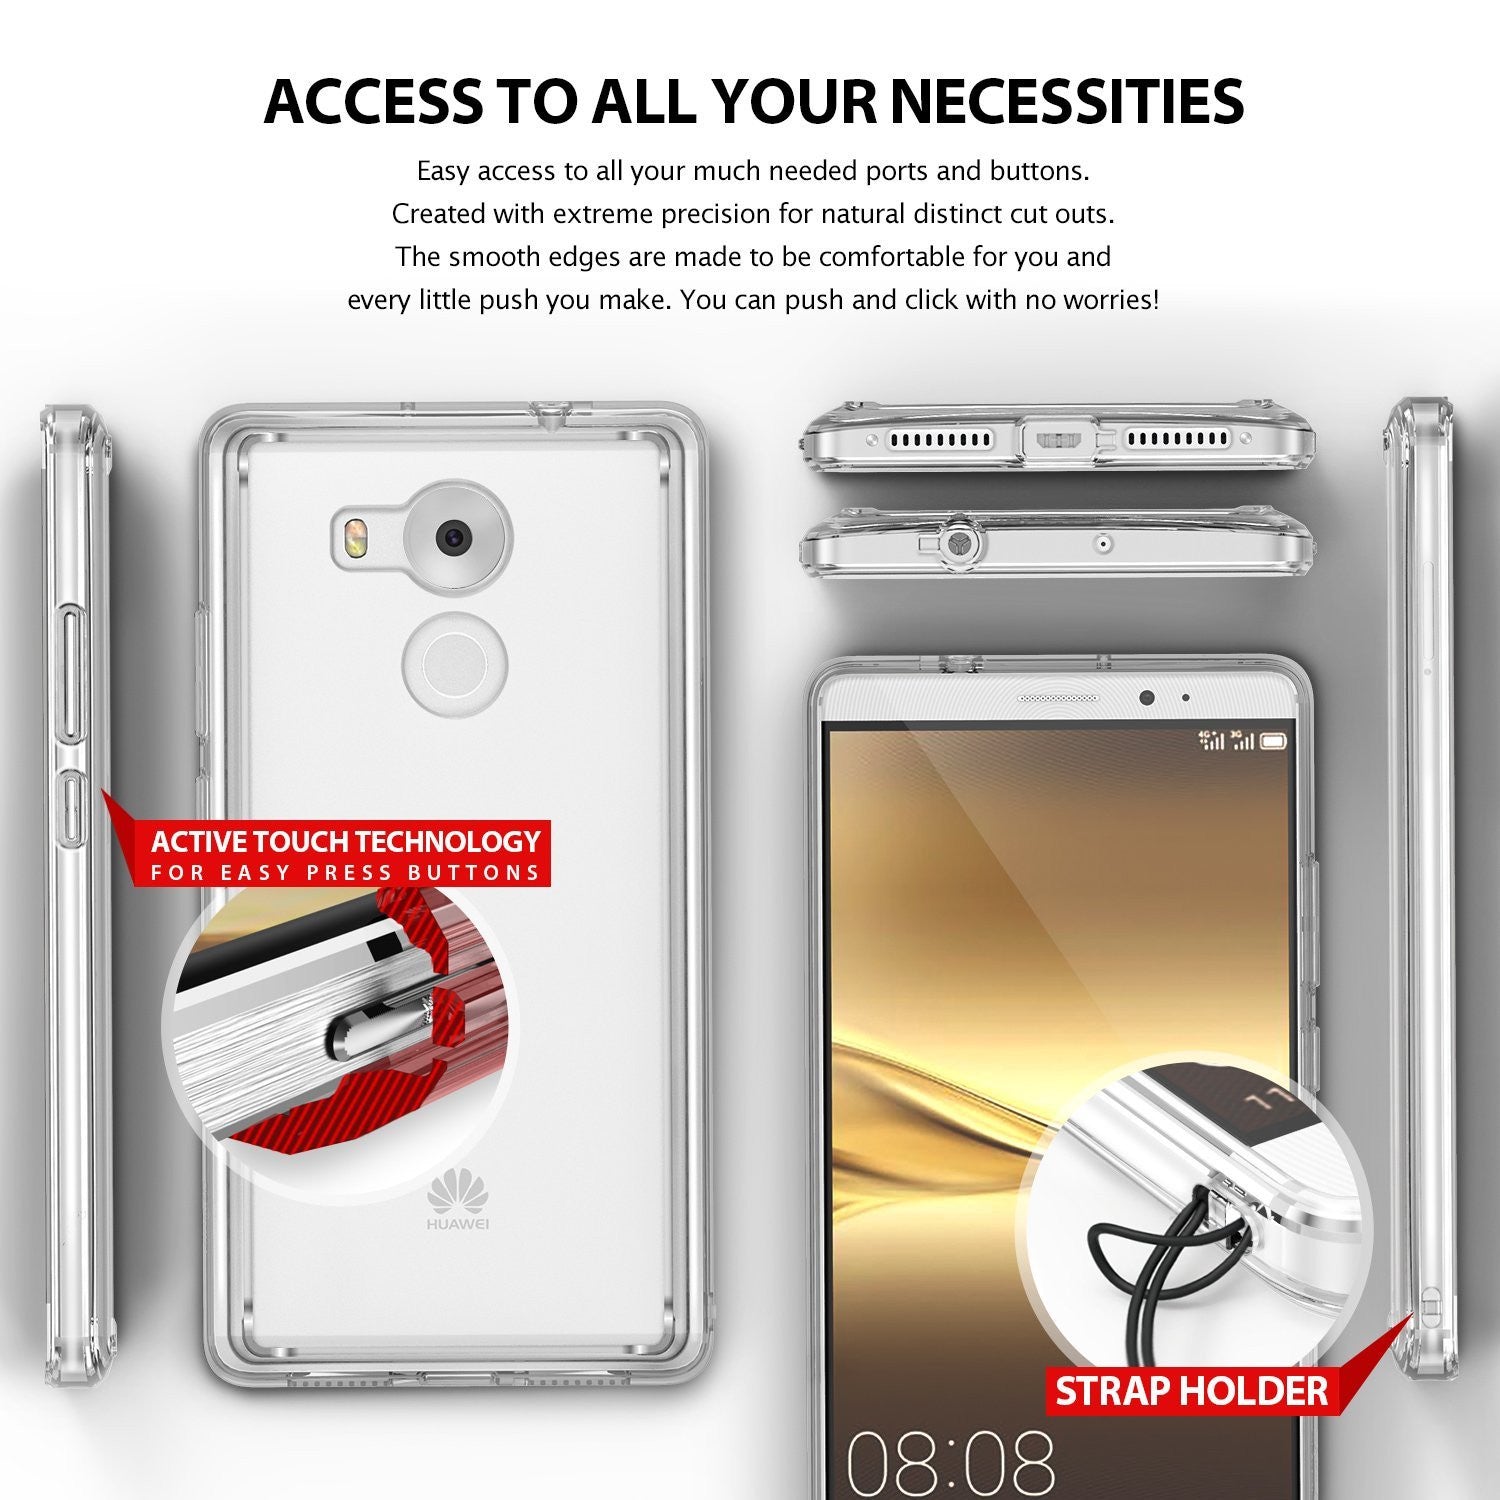 access to your necessities